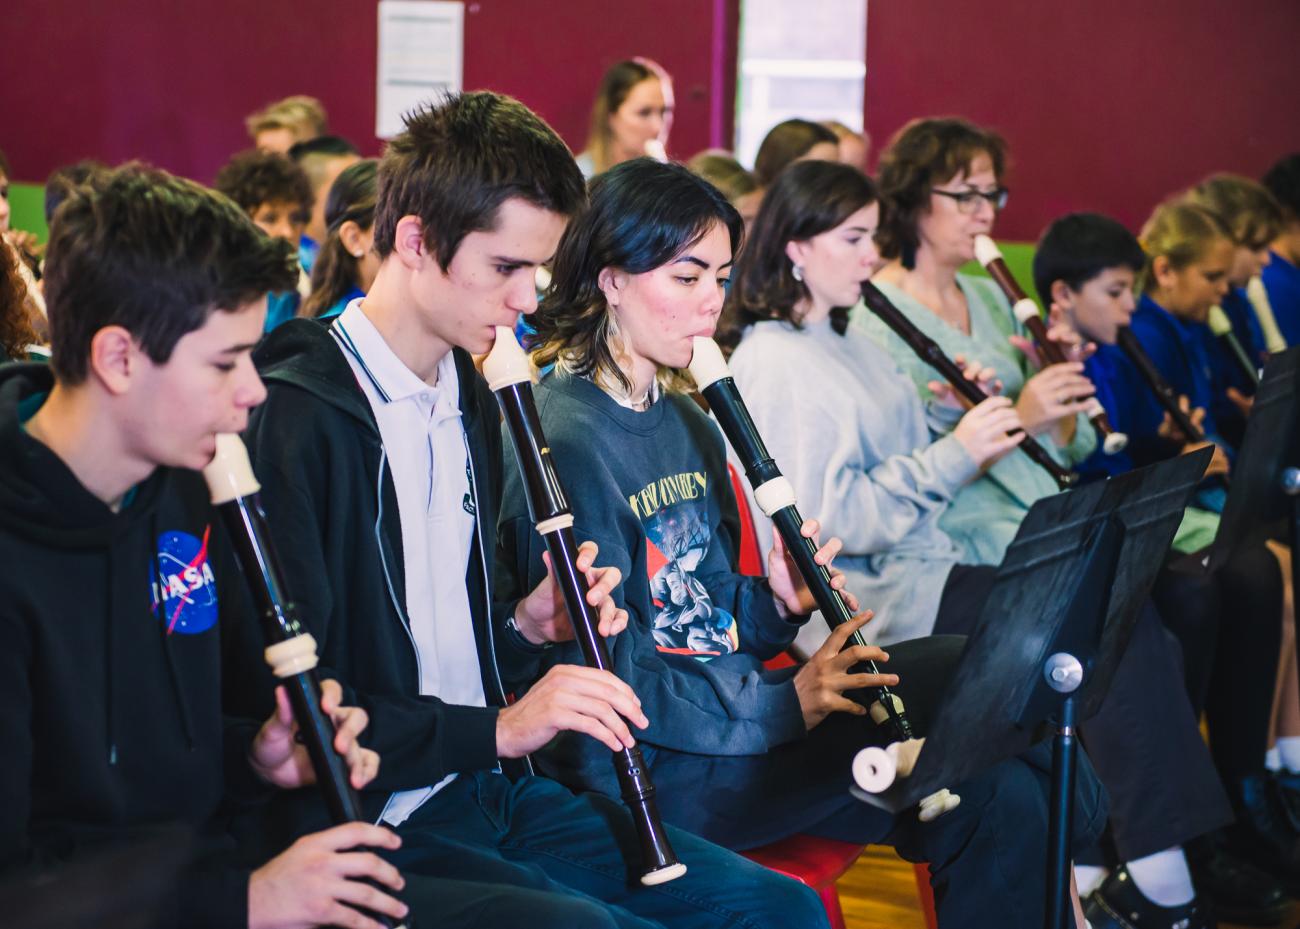 Secondary school students playing recorder